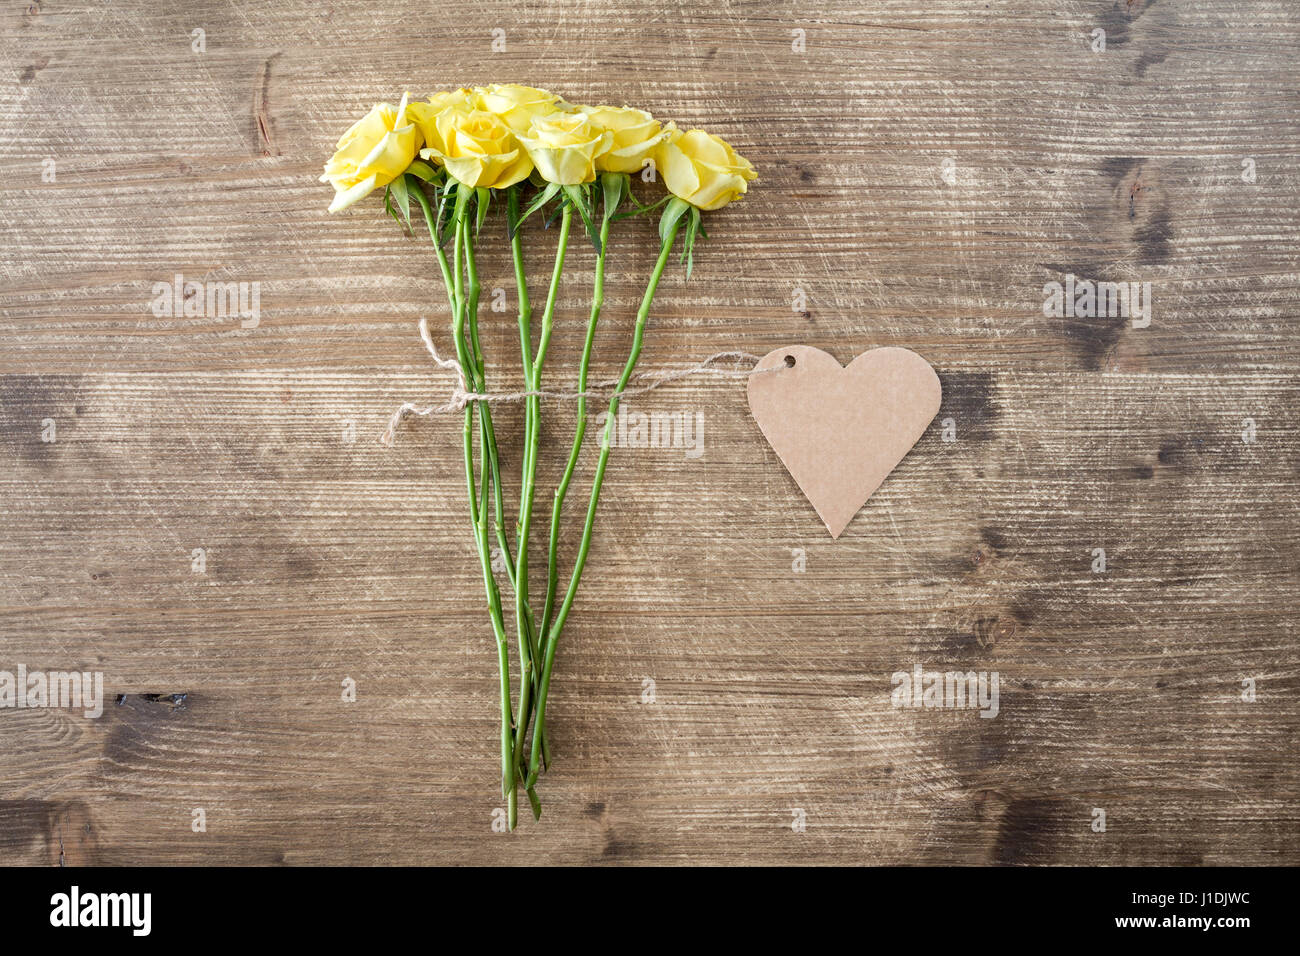 Bunch of yellow roses with heart shaped tag Stock Photo